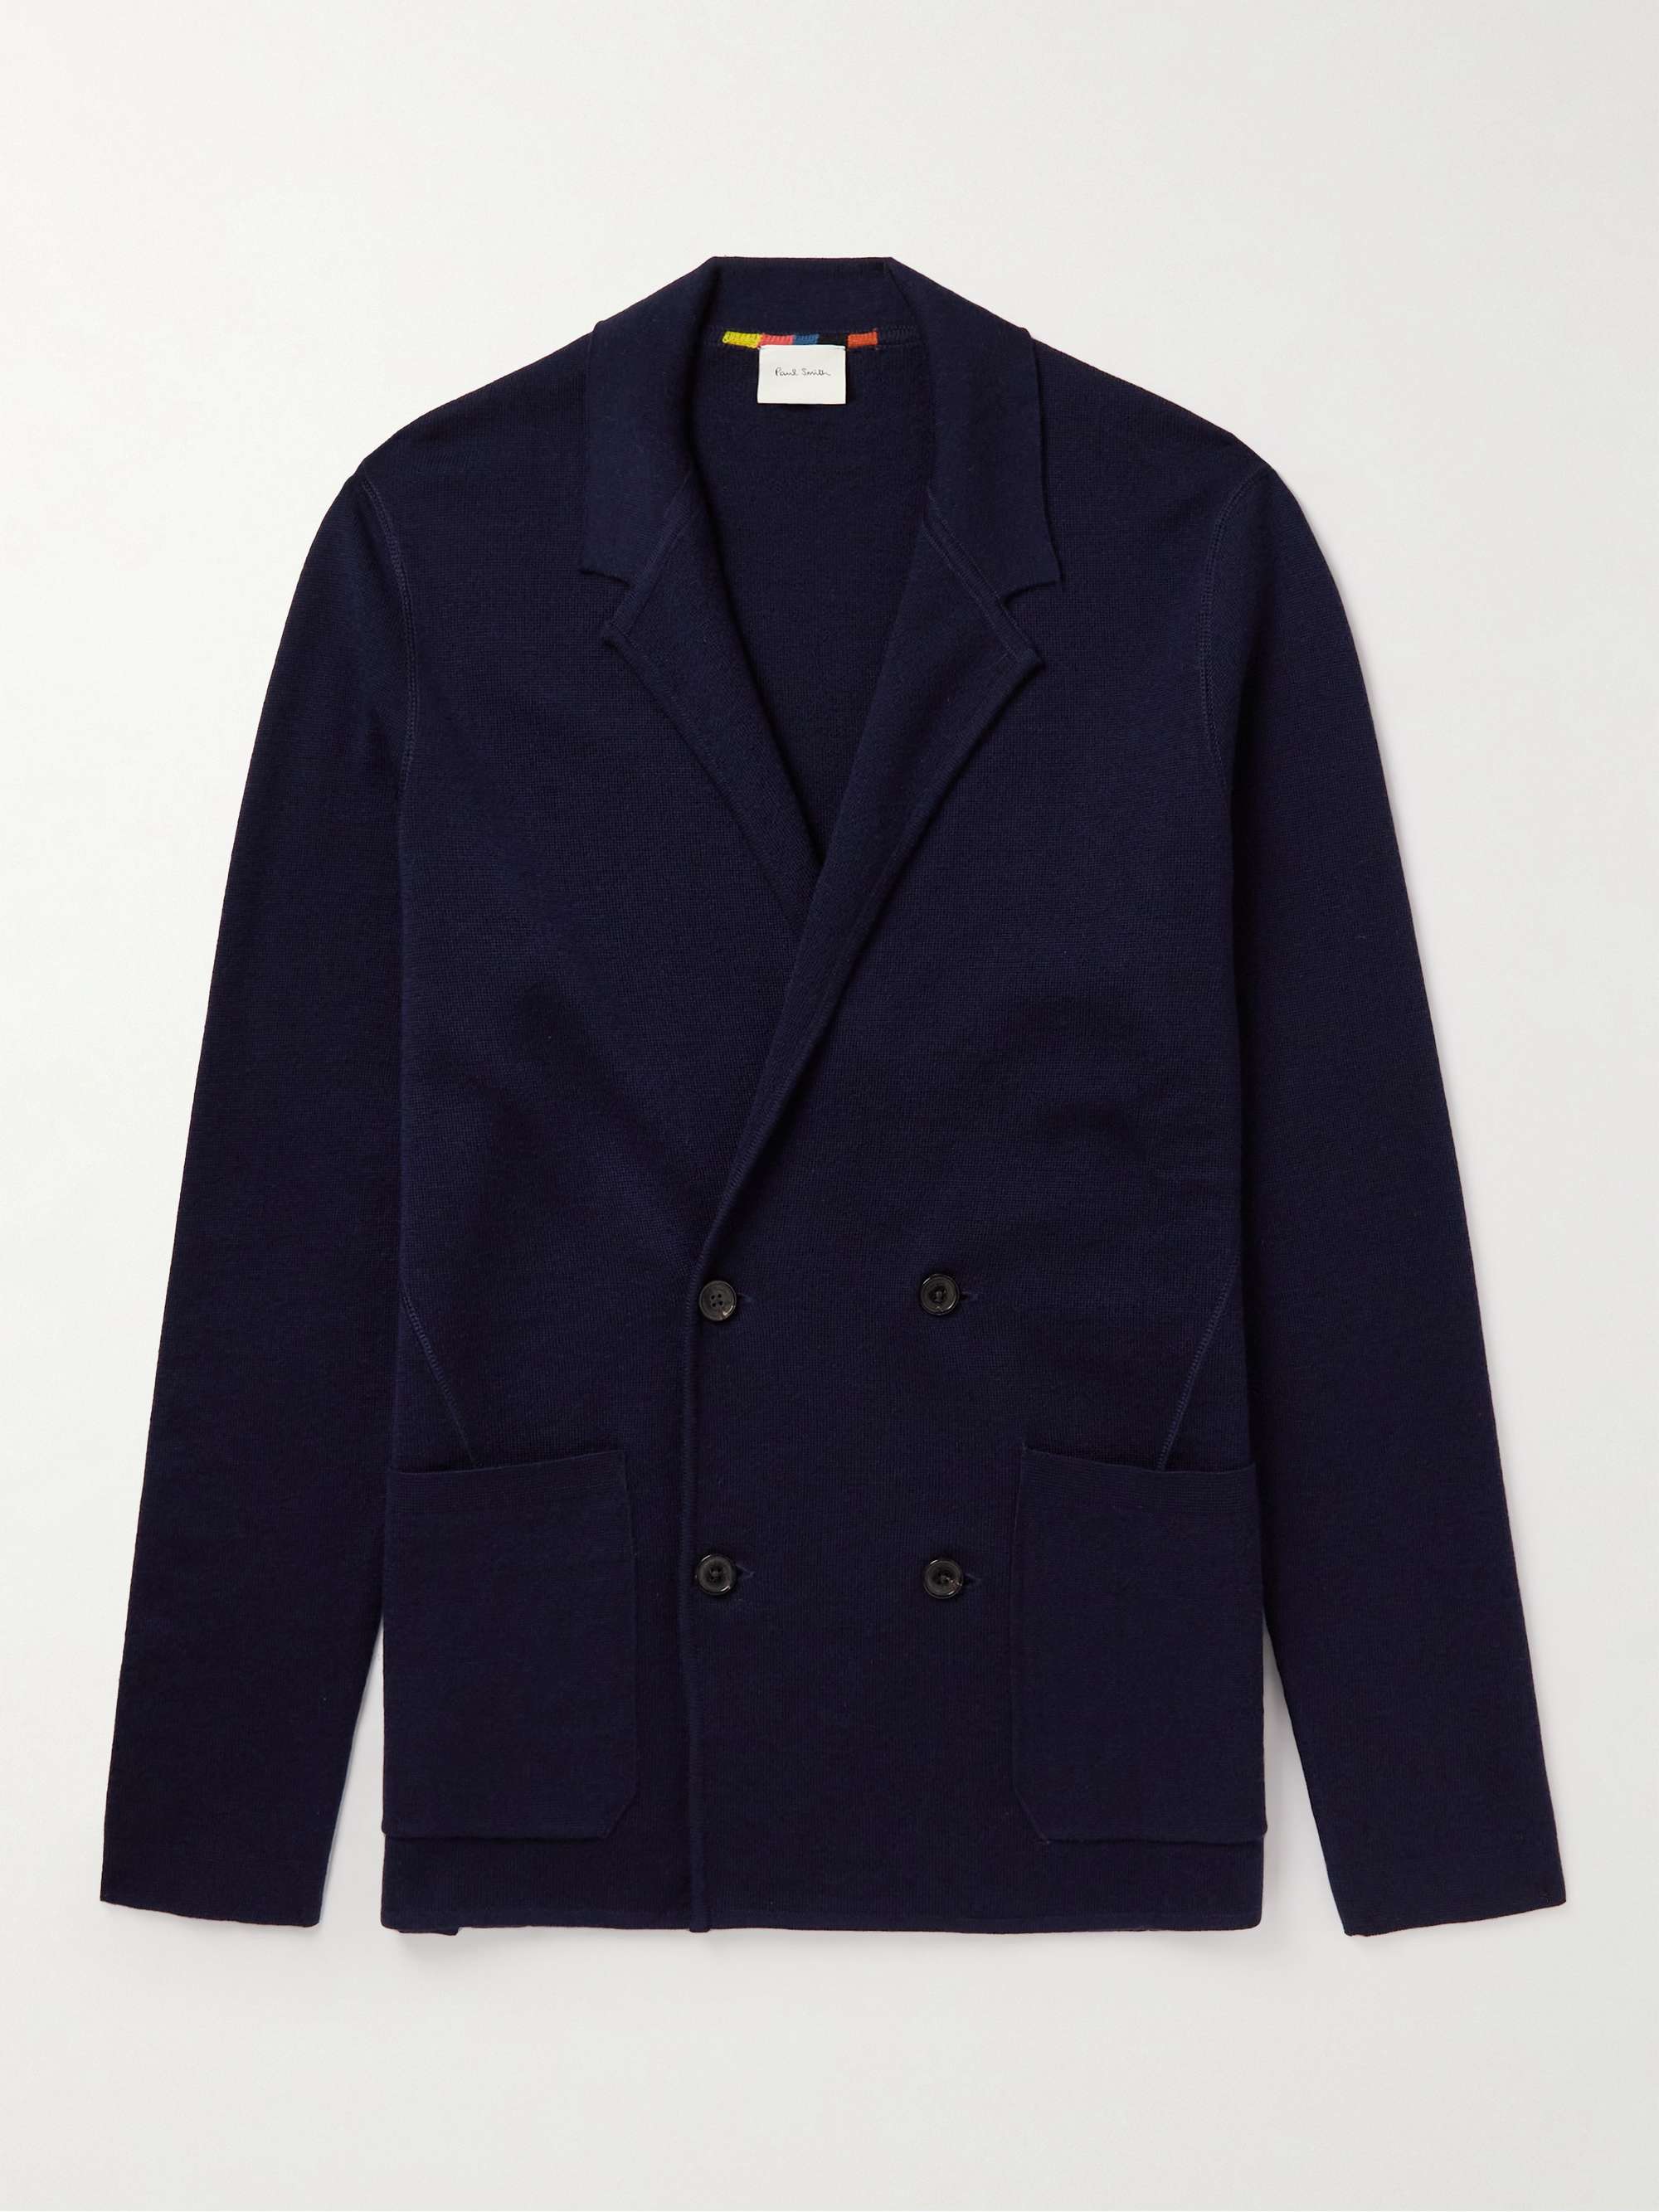 PAUL SMITH Double-Breasted Wool Cardigan for Men | MR PORTER